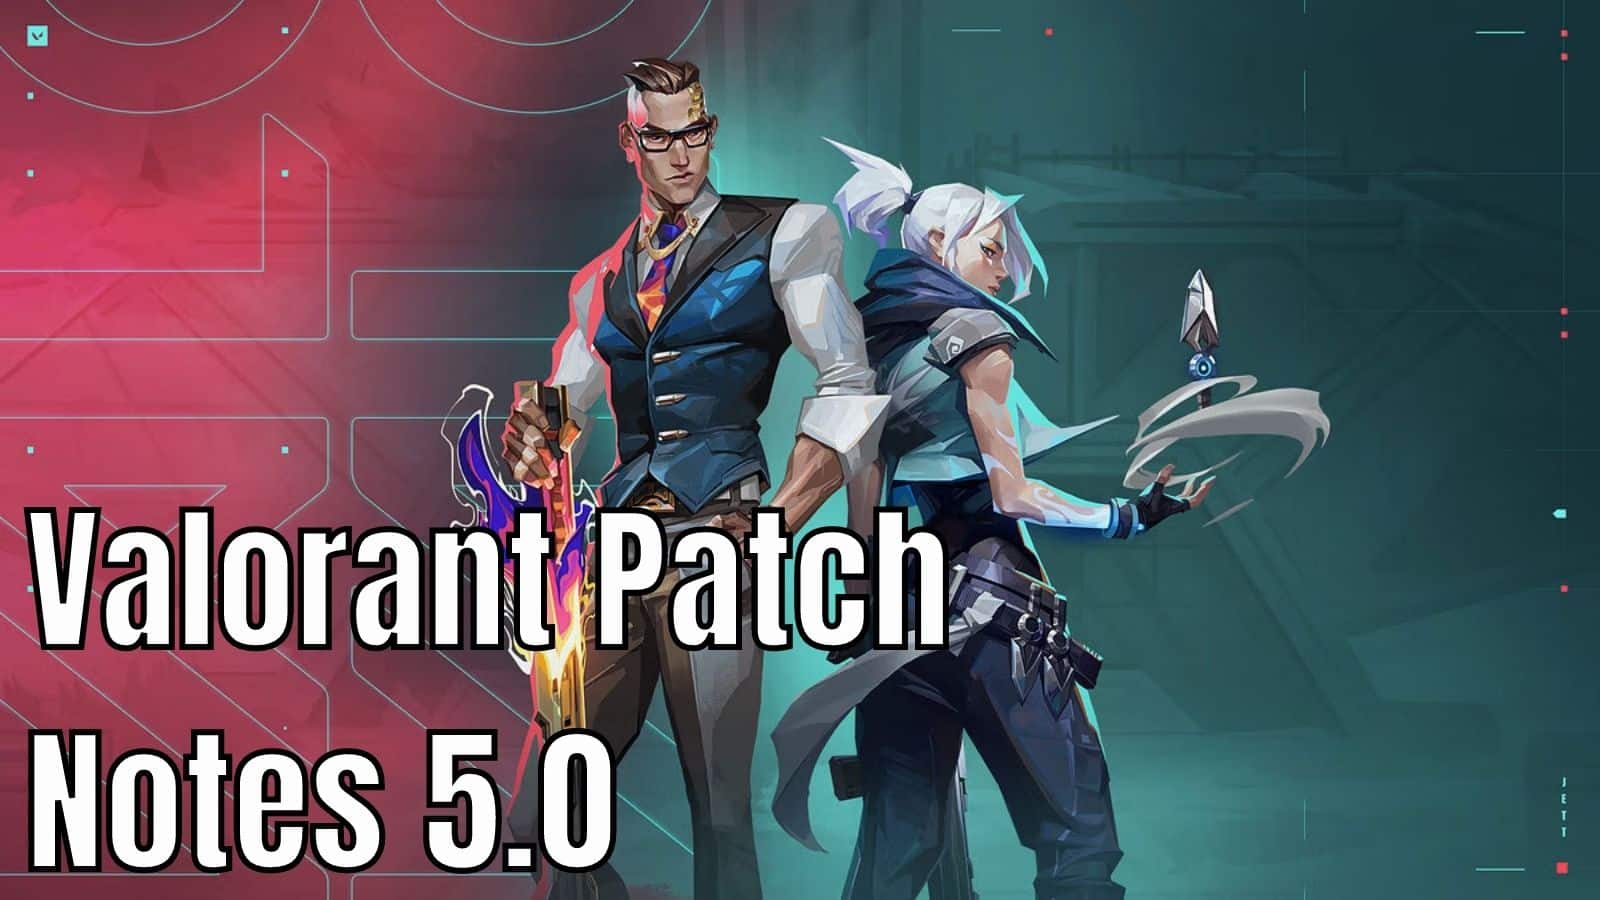 VALORANT Patch Notes 5.0